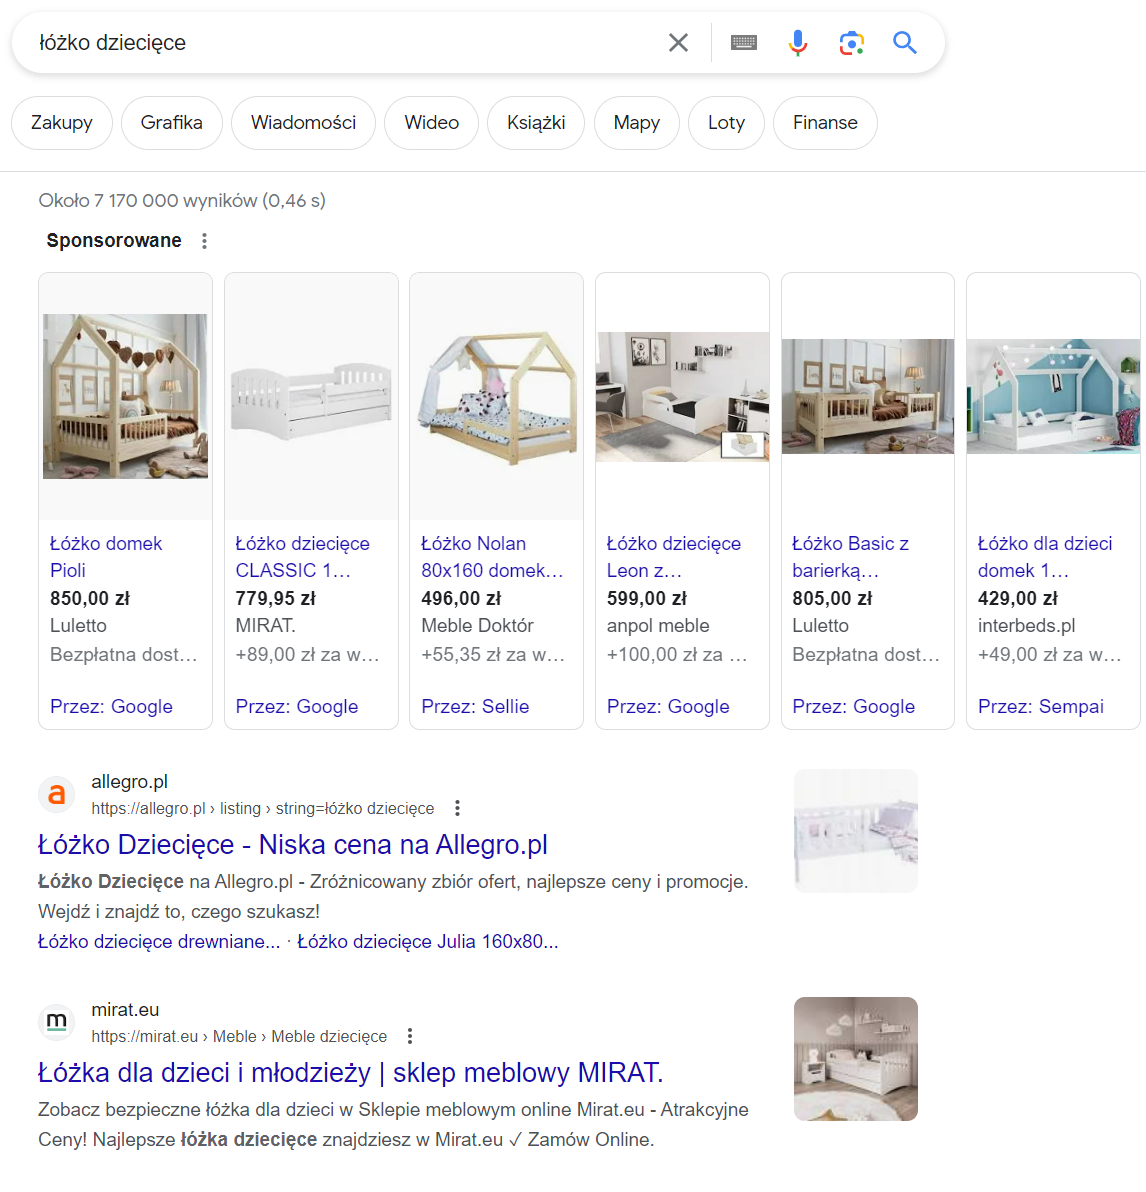 SERP - Google example | Up&More